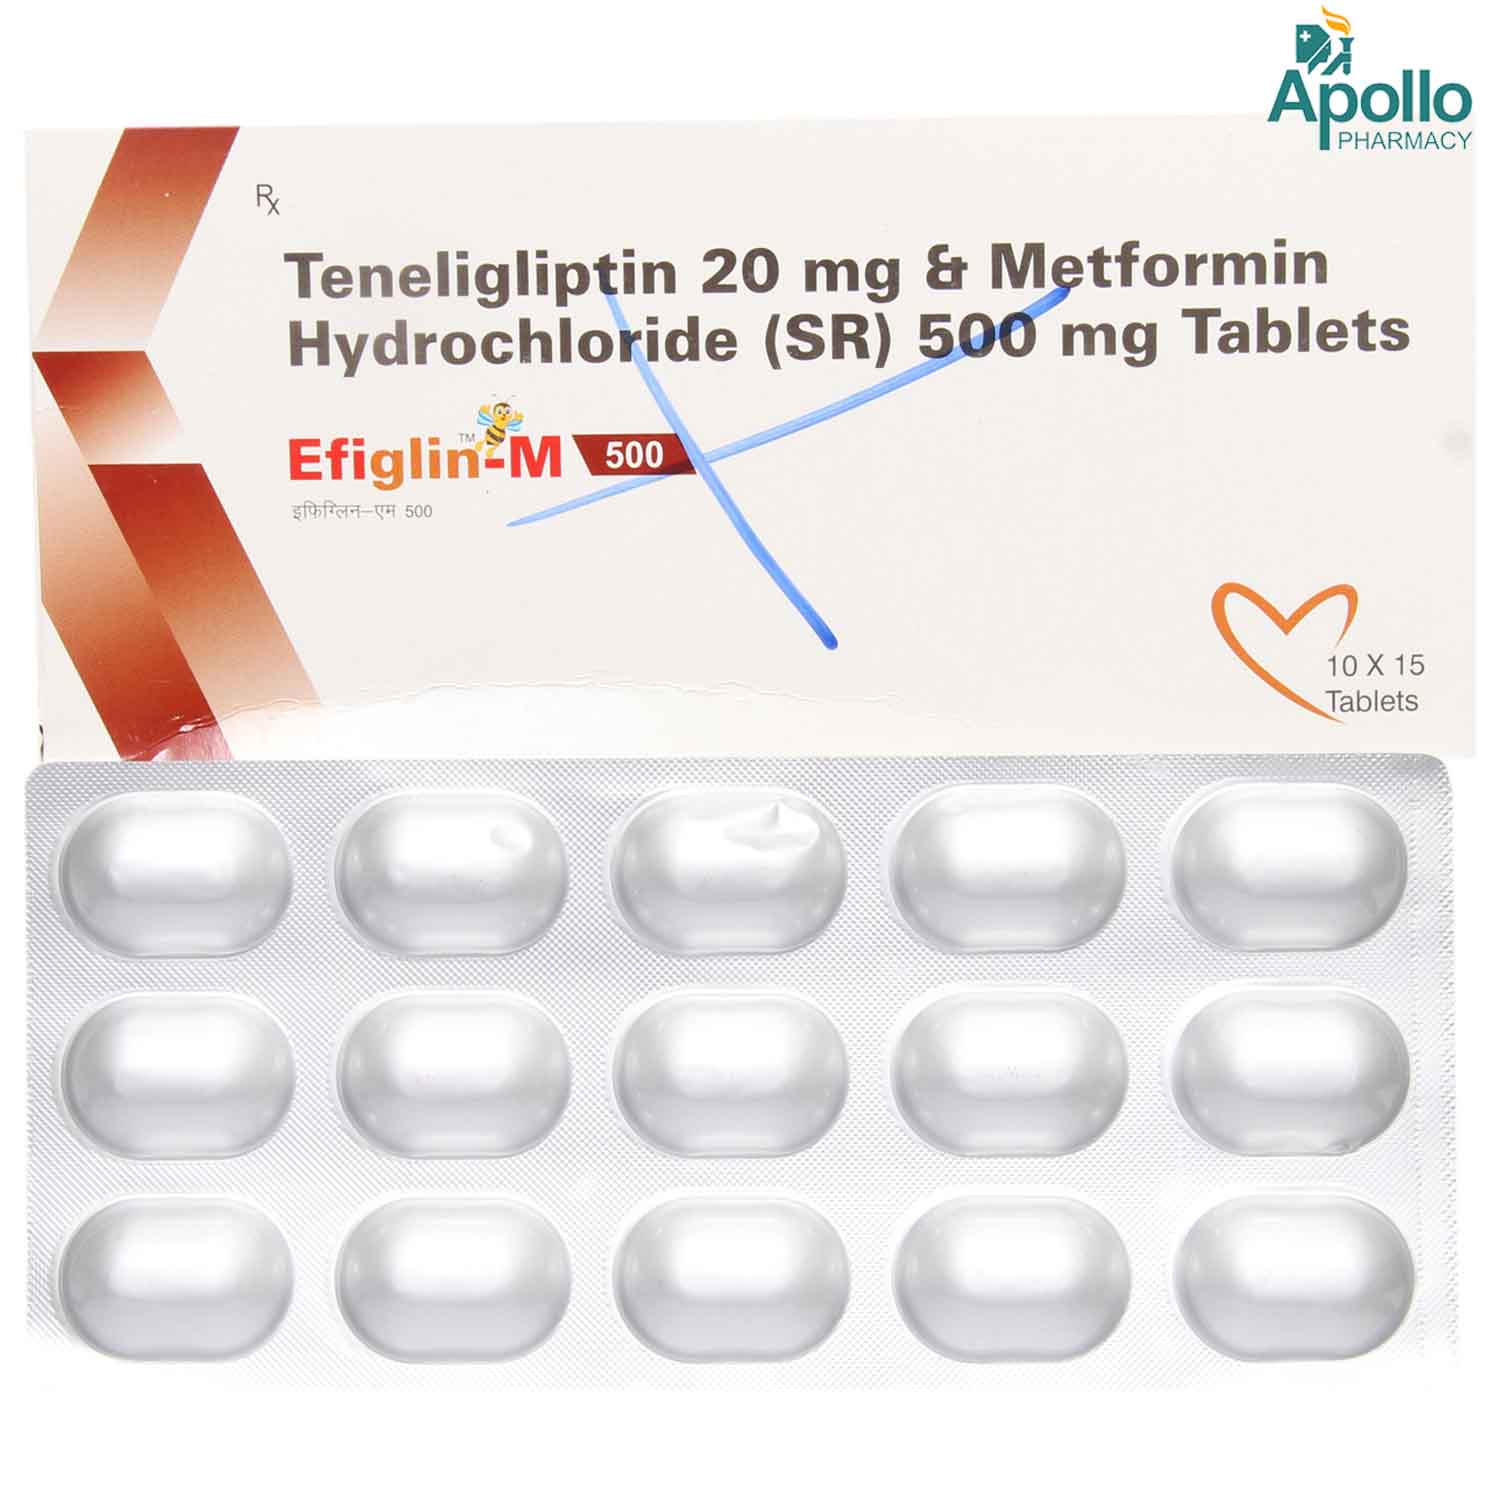 Efiglin M 500 Tablet 15 S Price Uses Side Effects Composition Apollo Pharmacy